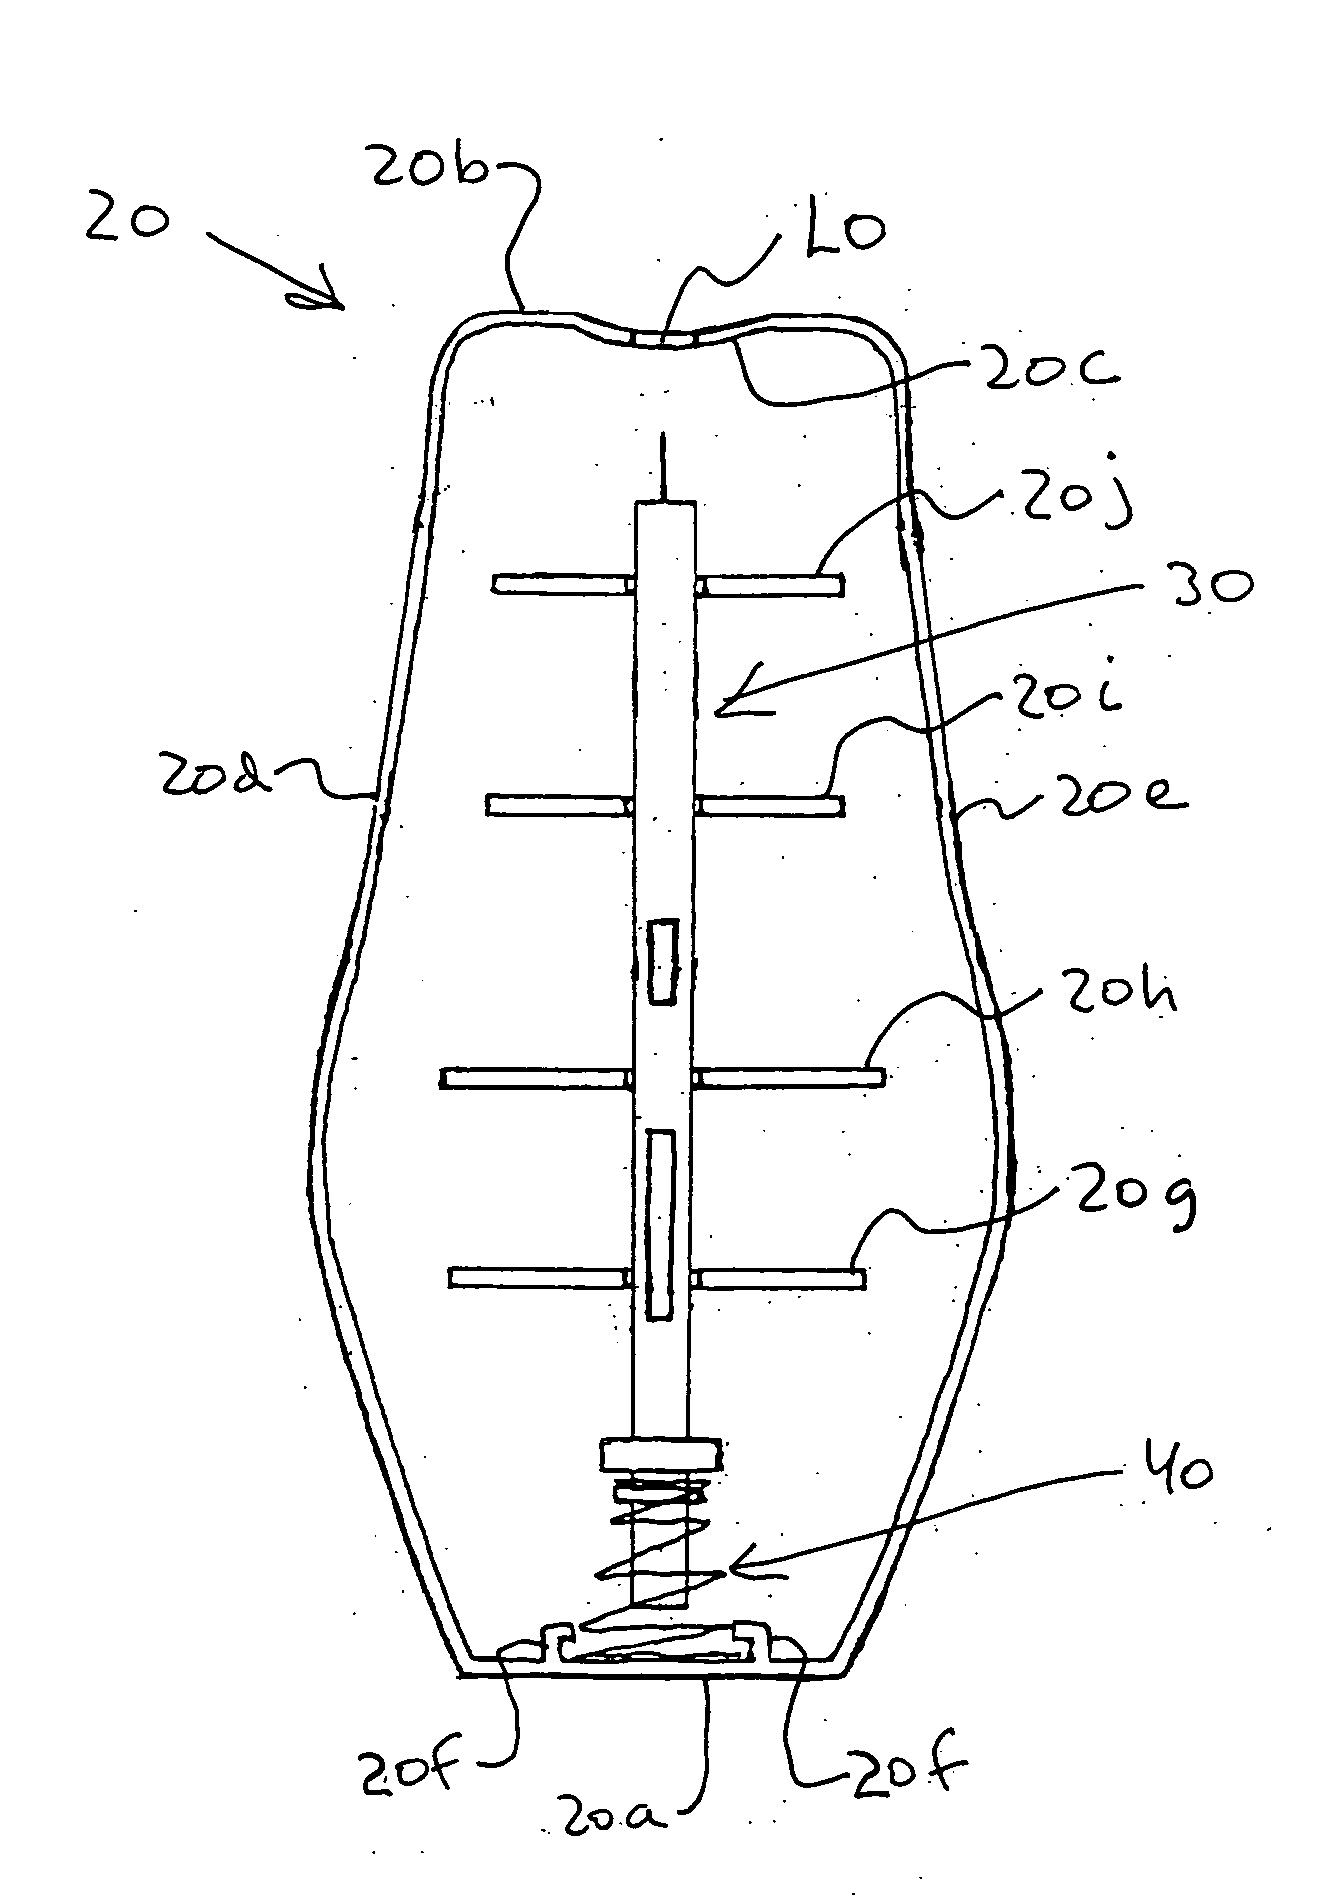 Adjustable disposable/single-use lancet device and method